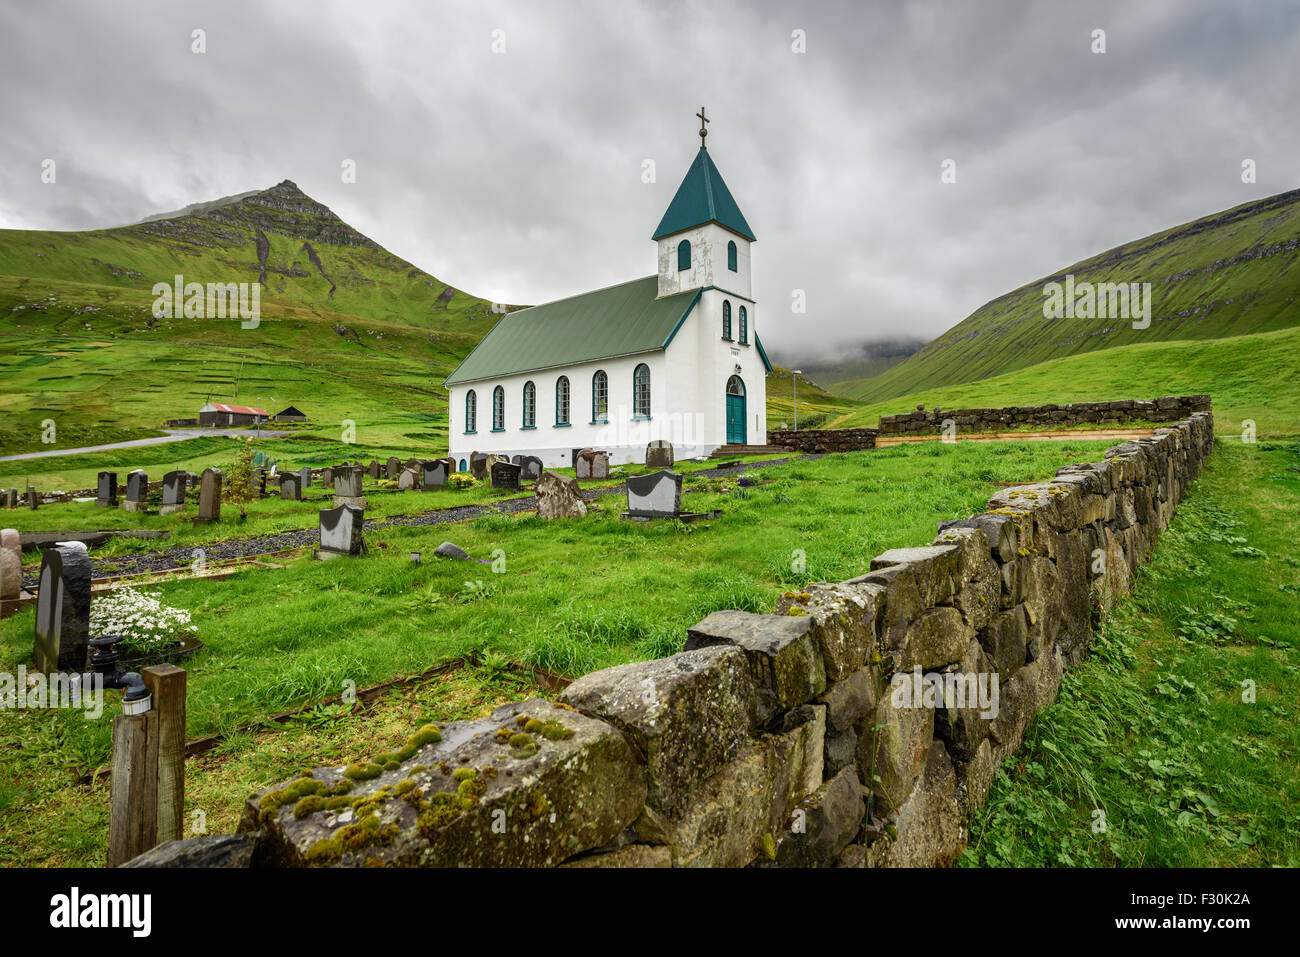 Small village church with cemetery in Gjogv located on the northeast tip of the island of Eysturoy, Faroe Islands, Denmark Stock Photo